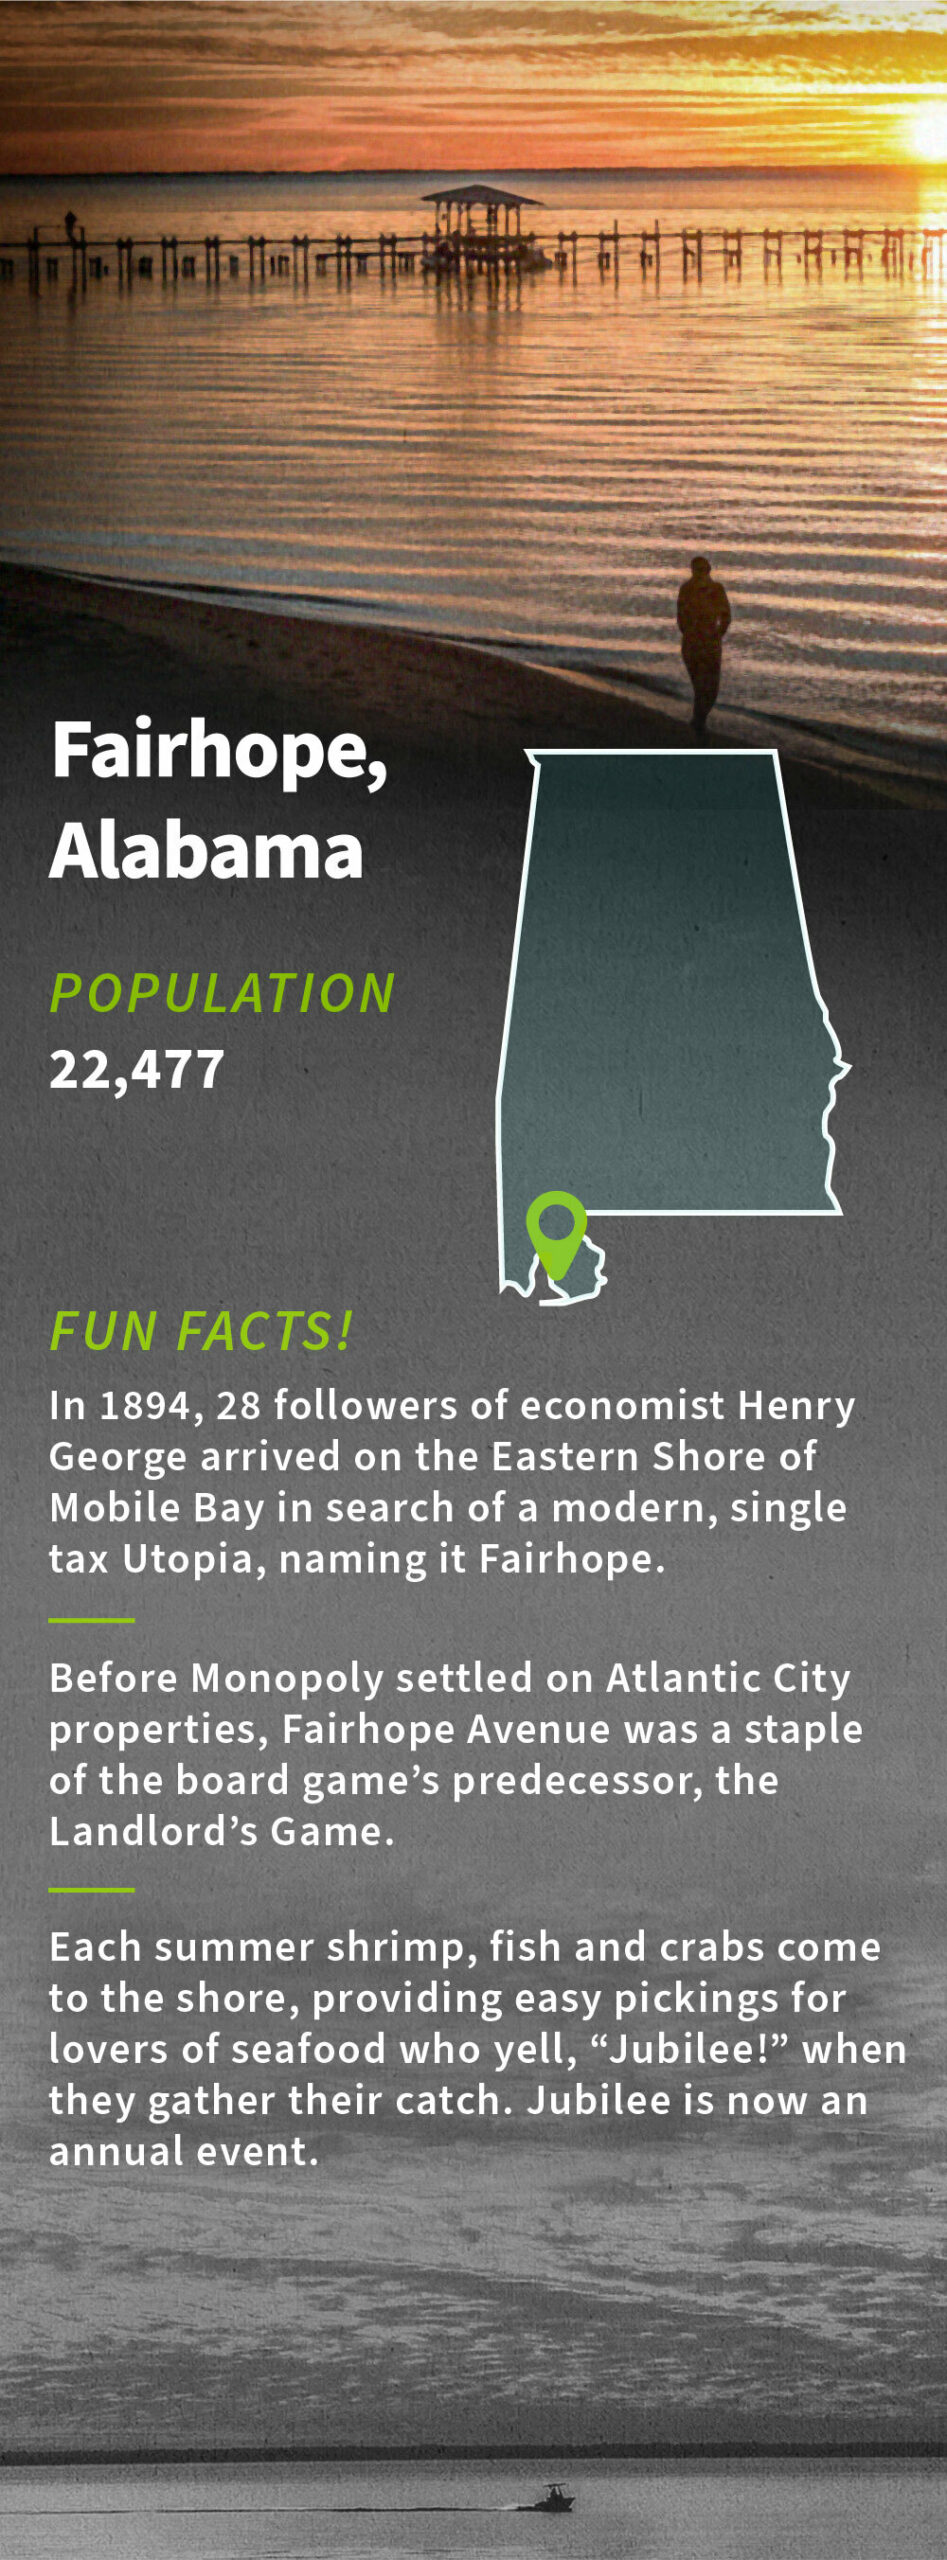 Infographic for Fairhope, Alabama